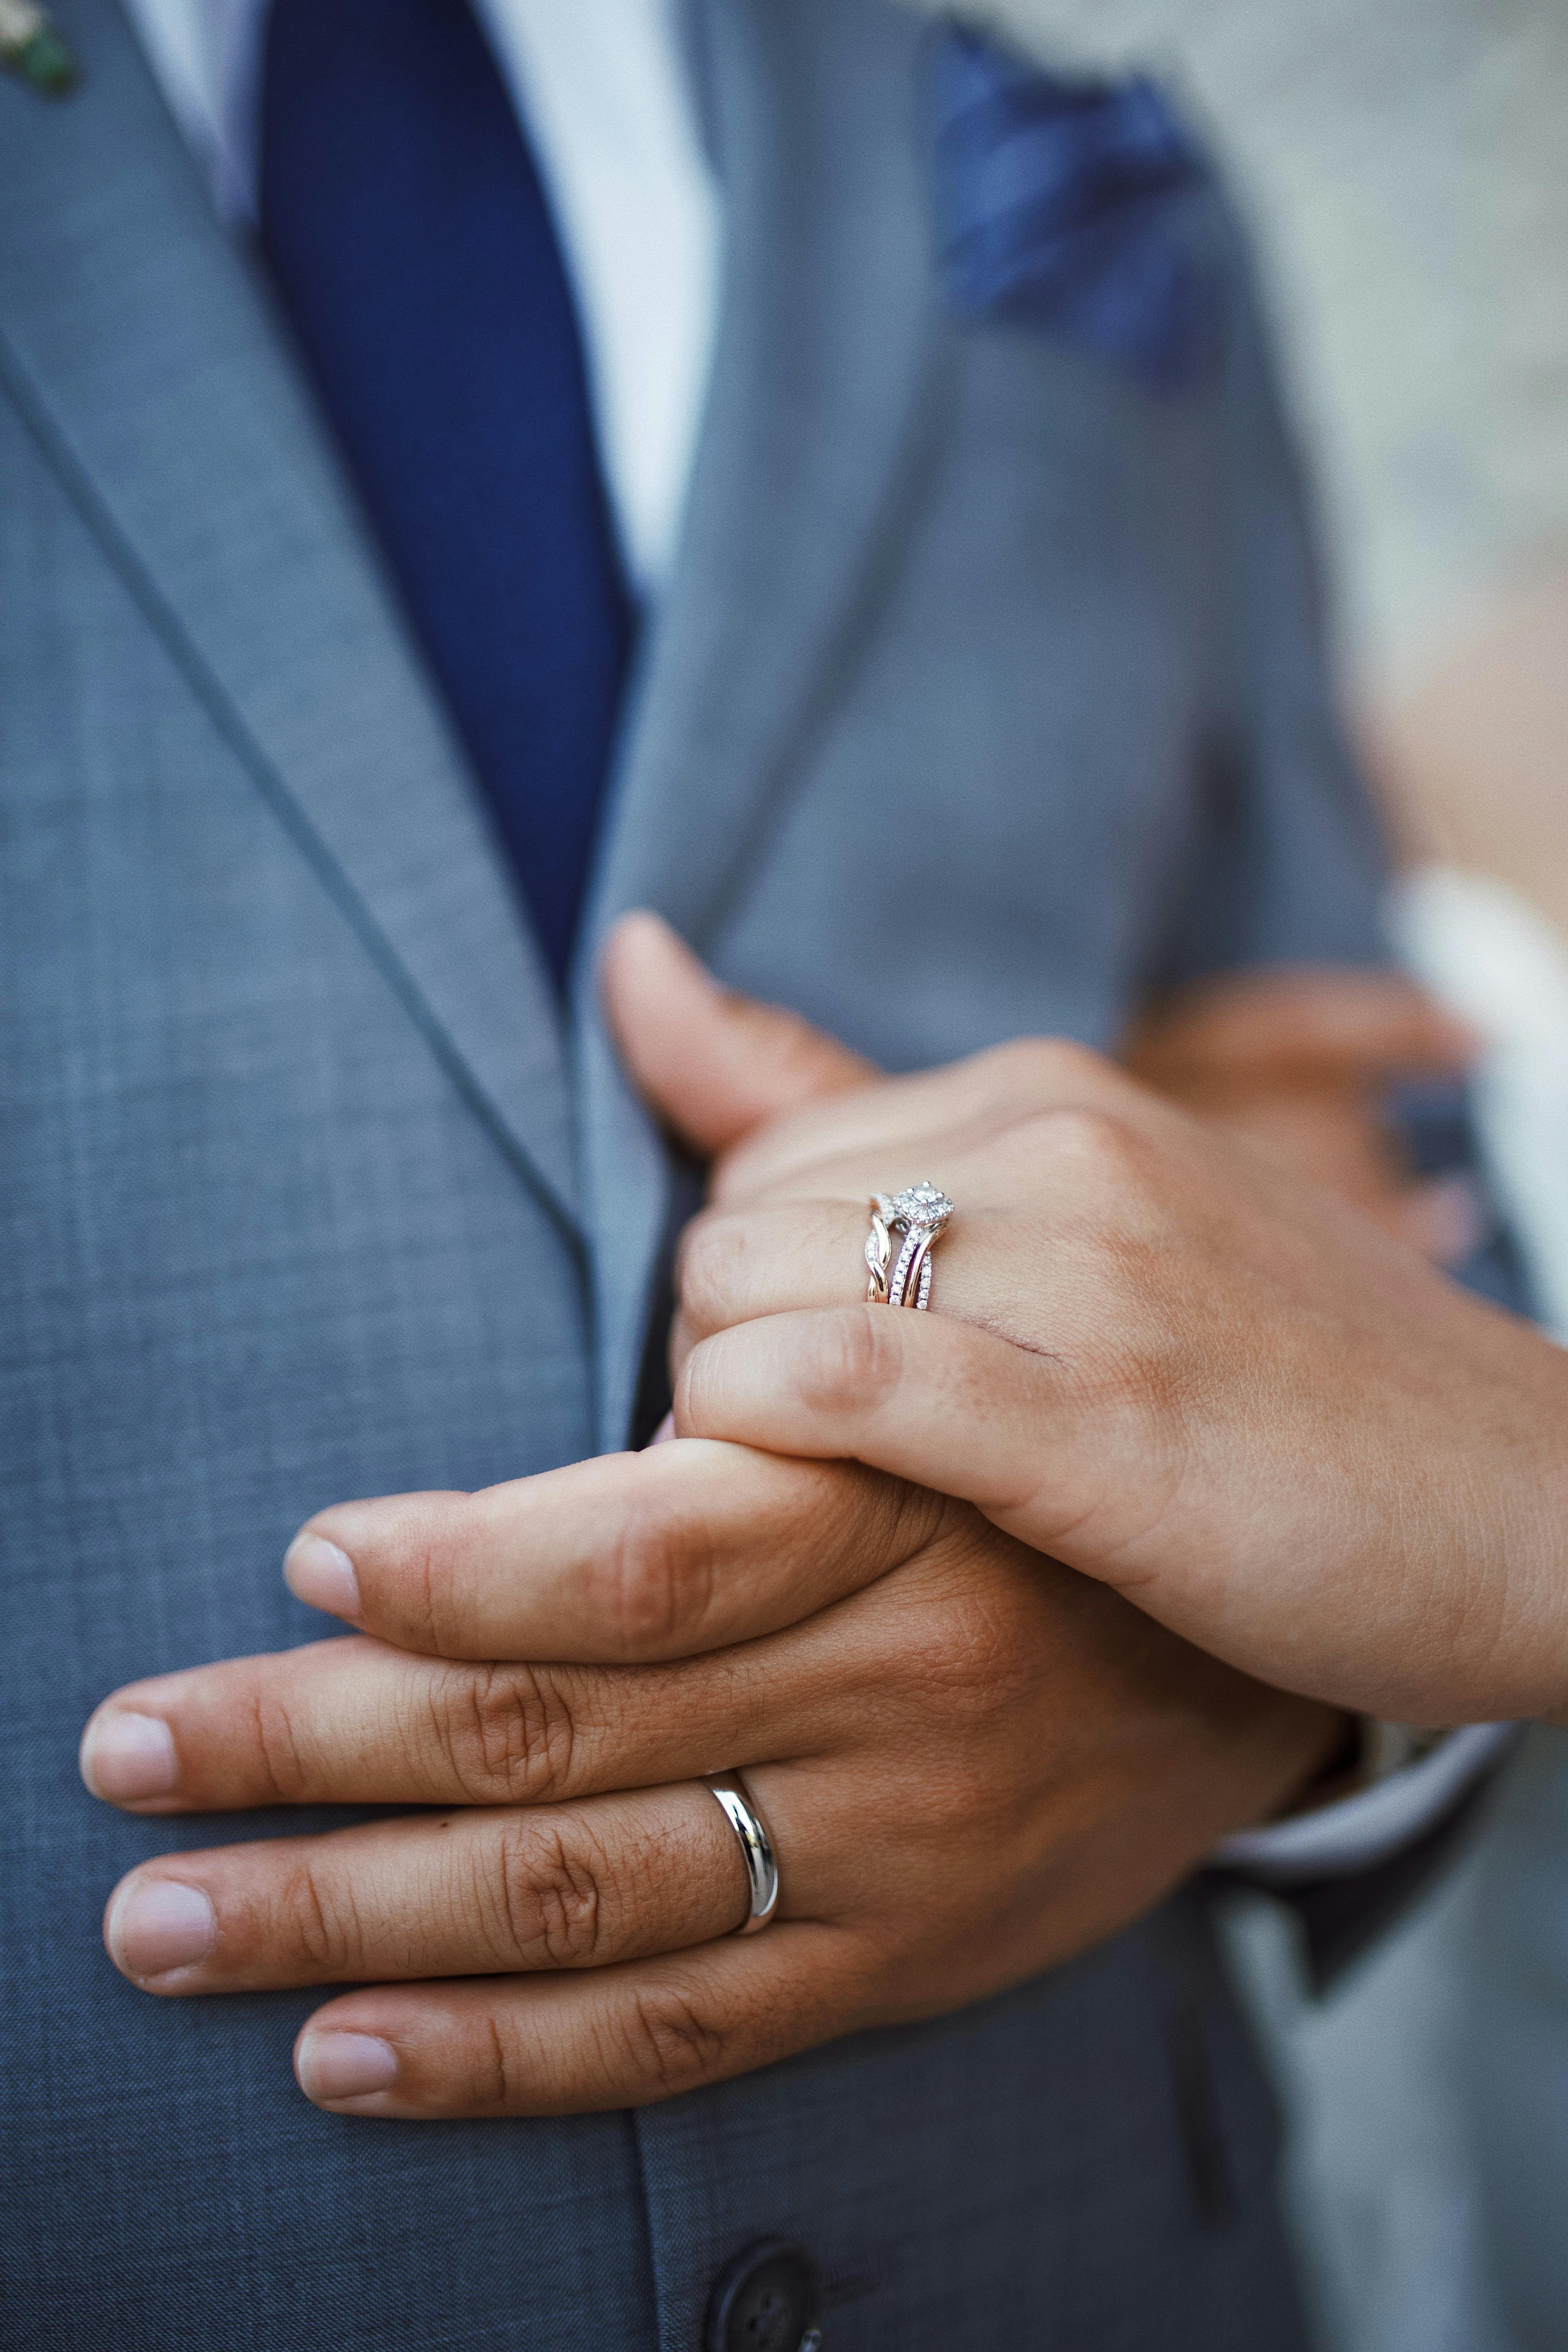 A woman's hands with a ring on her finger photo – Free Wedding Image on  Unsplash